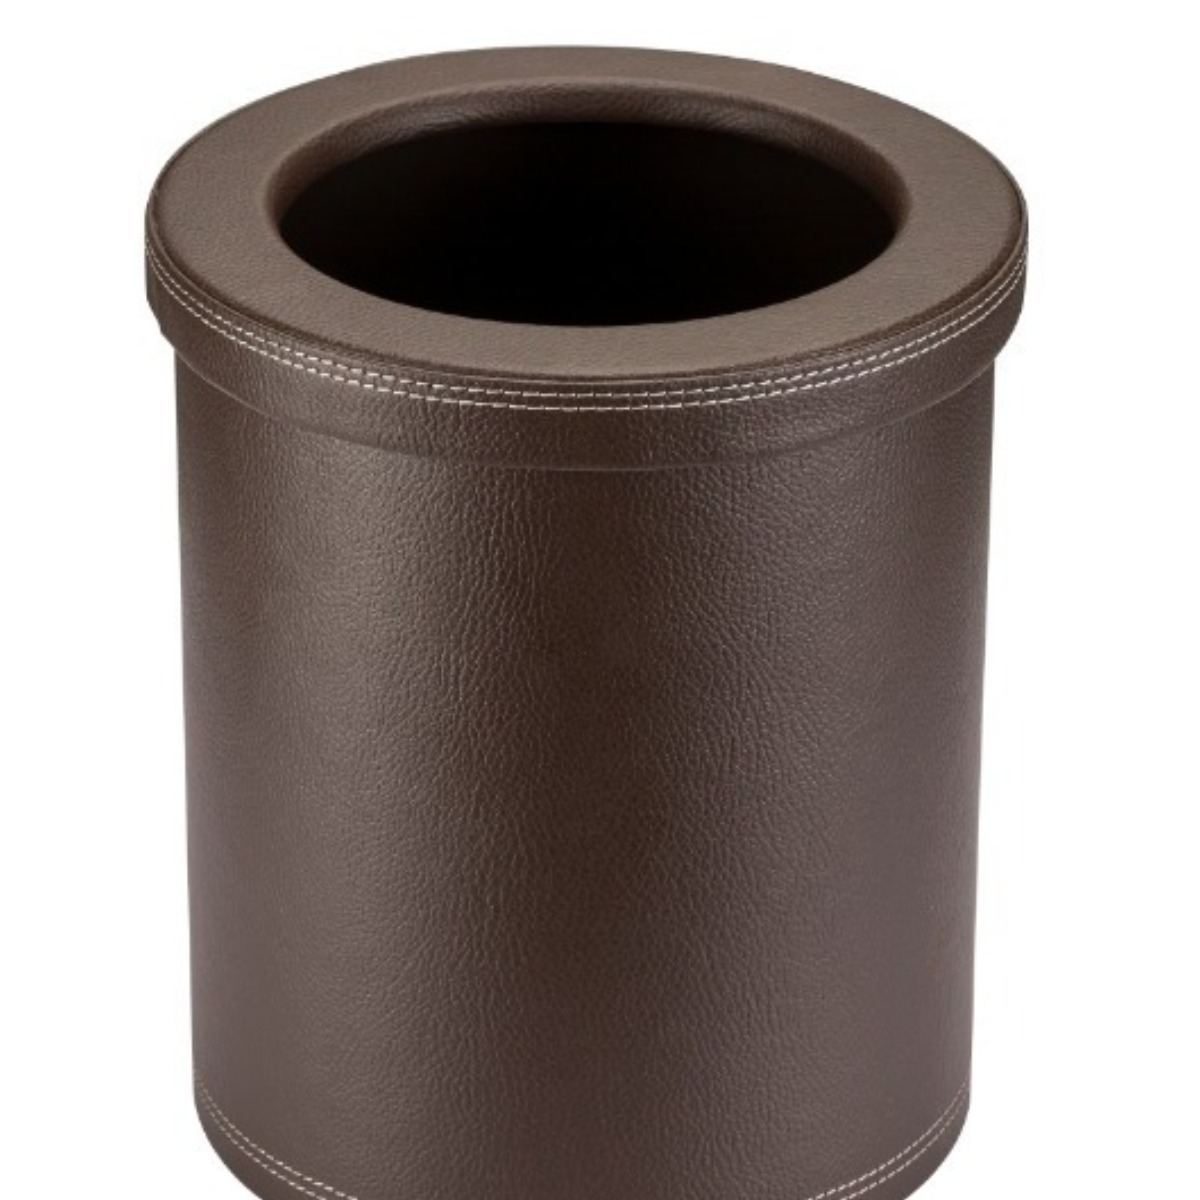 AB-312 Leather Lined Dustbin